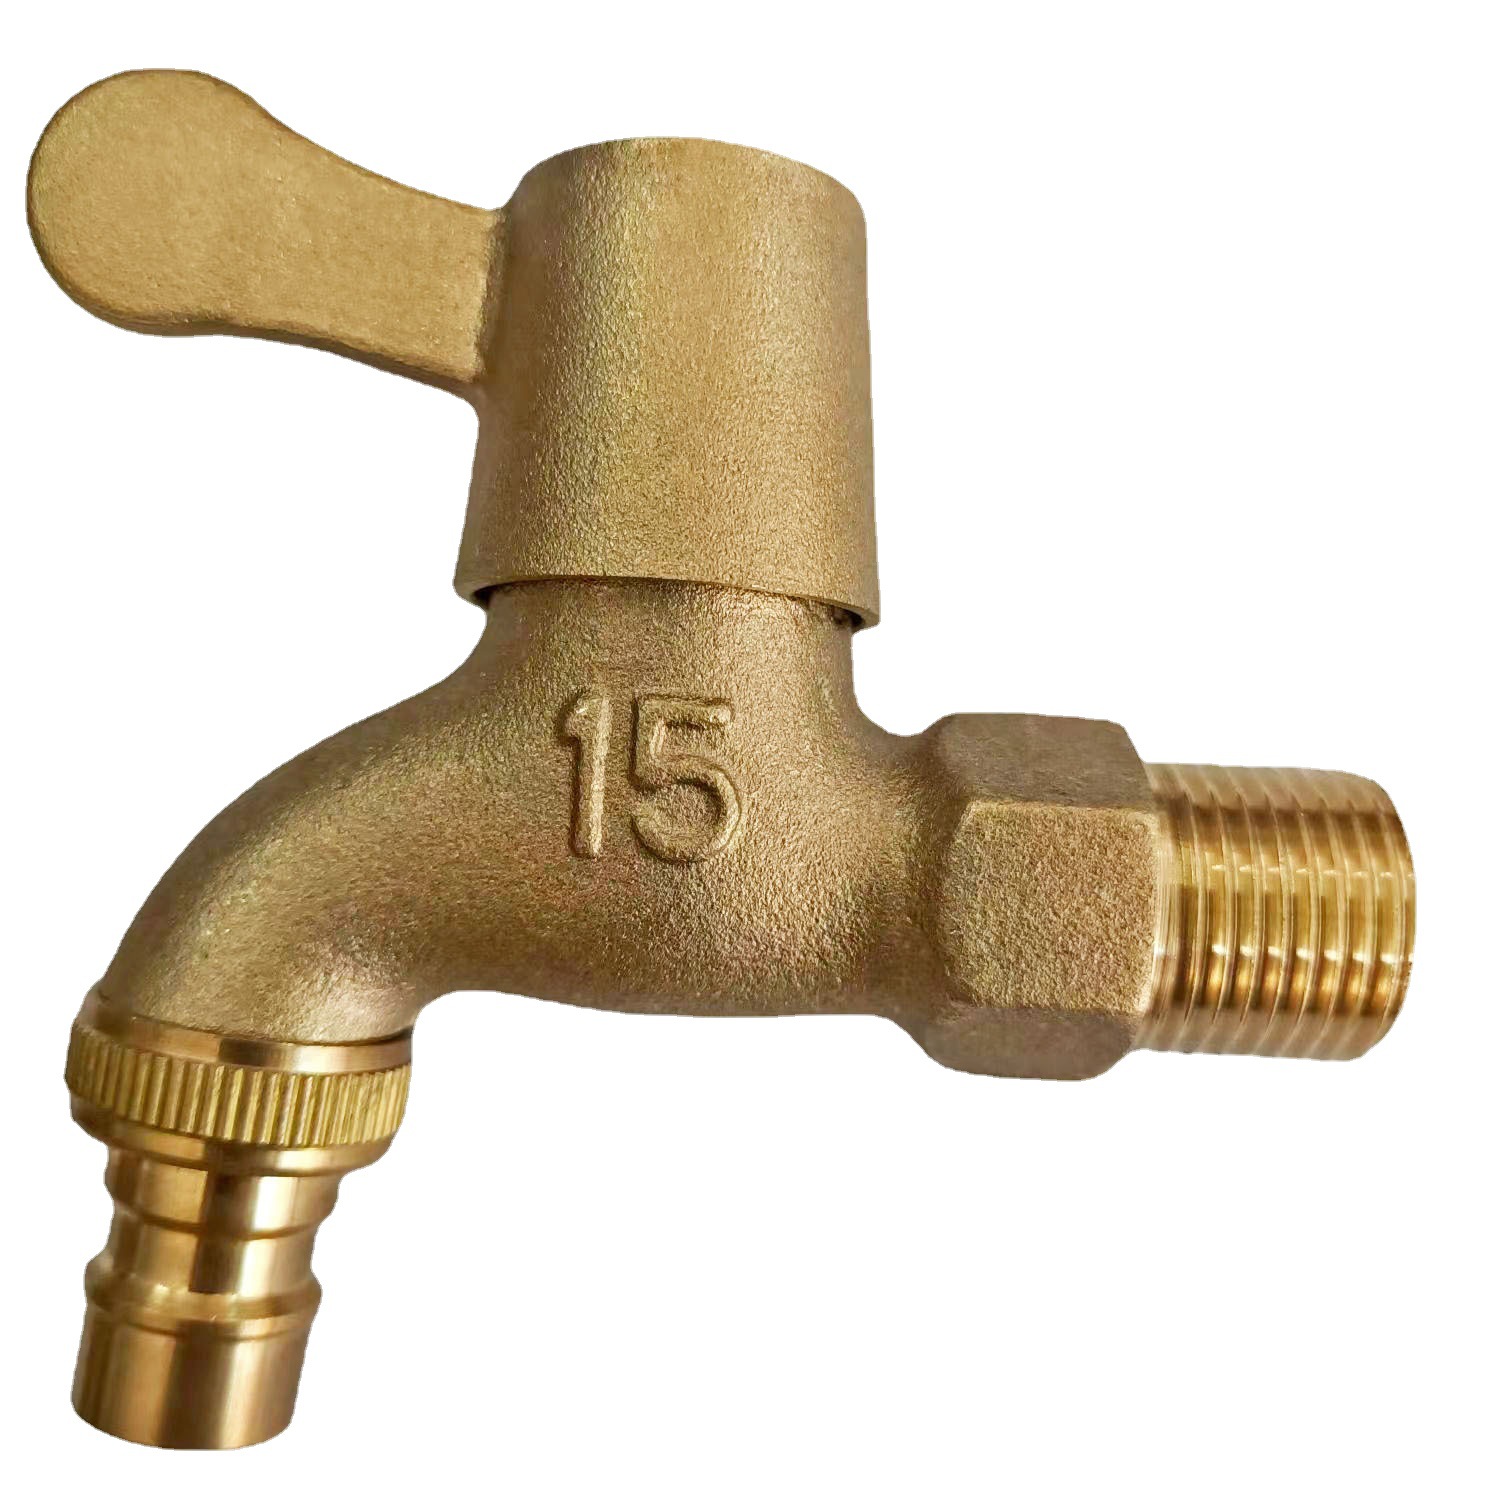 Pure Brass Pure Copper Core Copper Rod Natural Color Washing Machine Tap Bibcock Mop Pool Balcony Washing Machine Water Tap